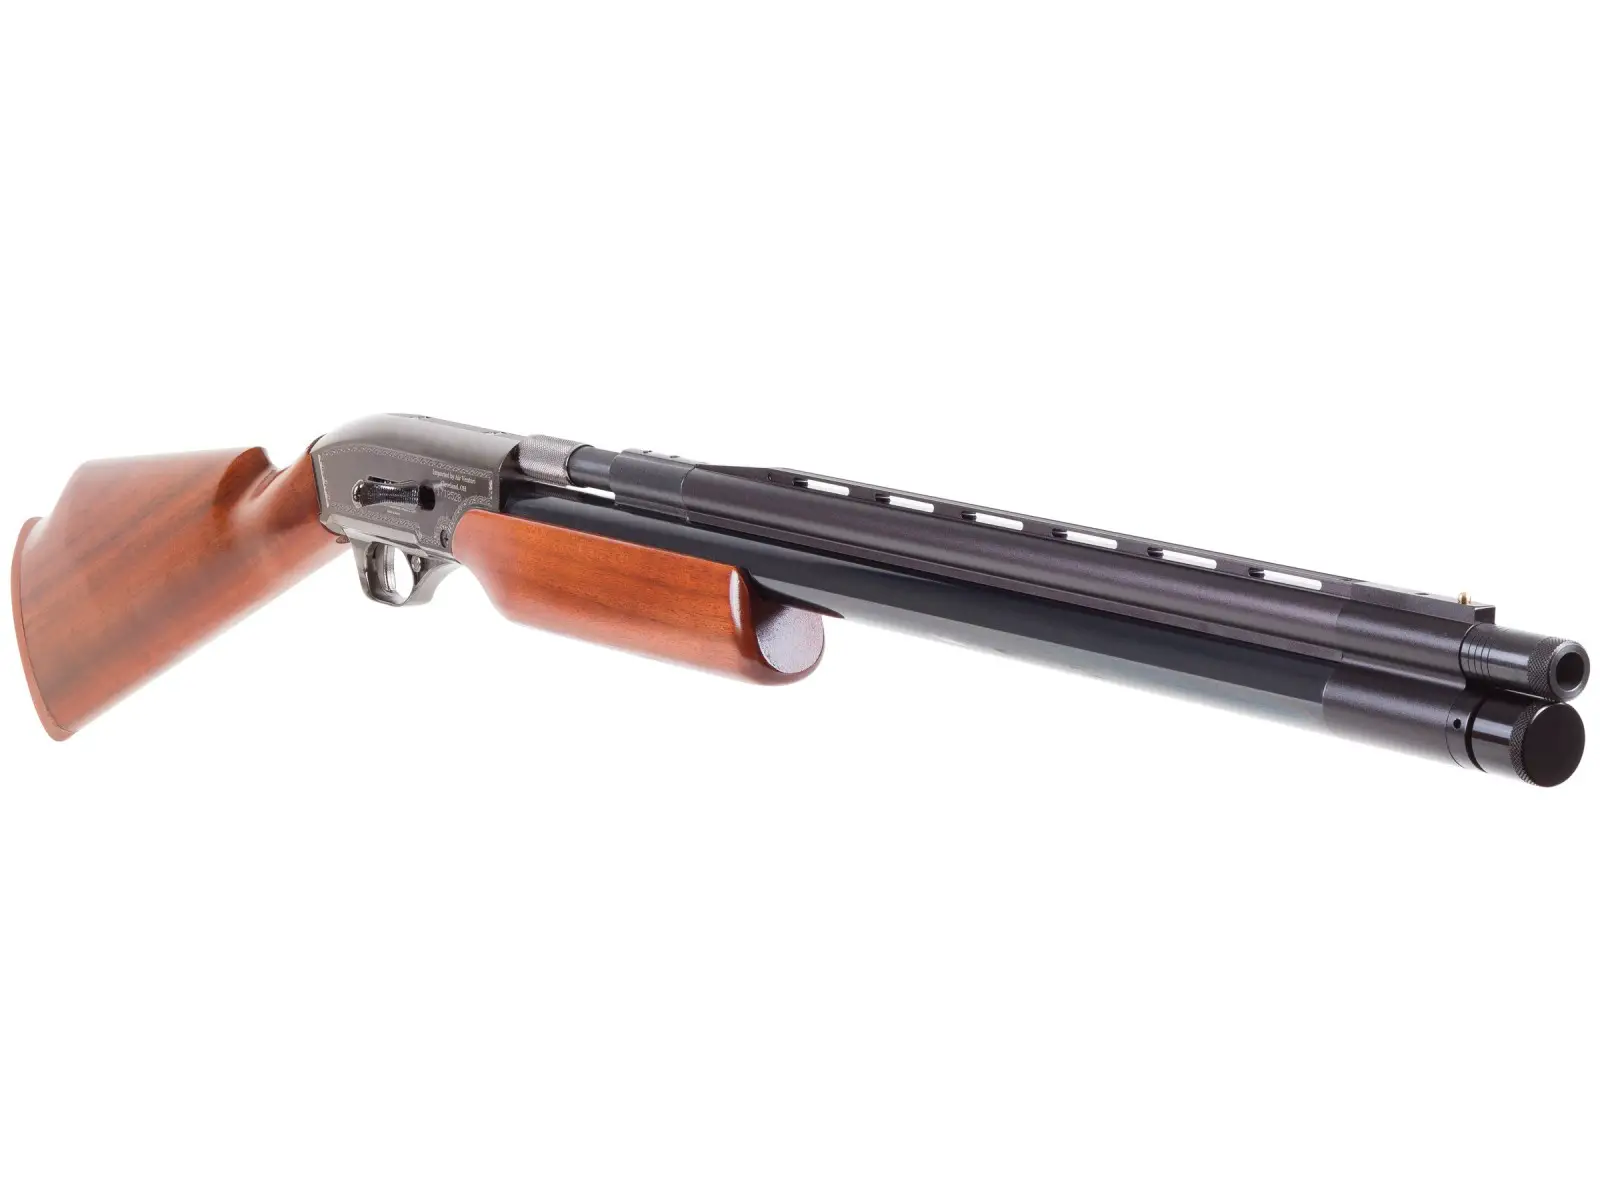 s11 Best .50 Caliber Air Rifles - Top 5 Hard-hitting Pellet Guns for Big Games (Reviews and Buying Guide 2023)